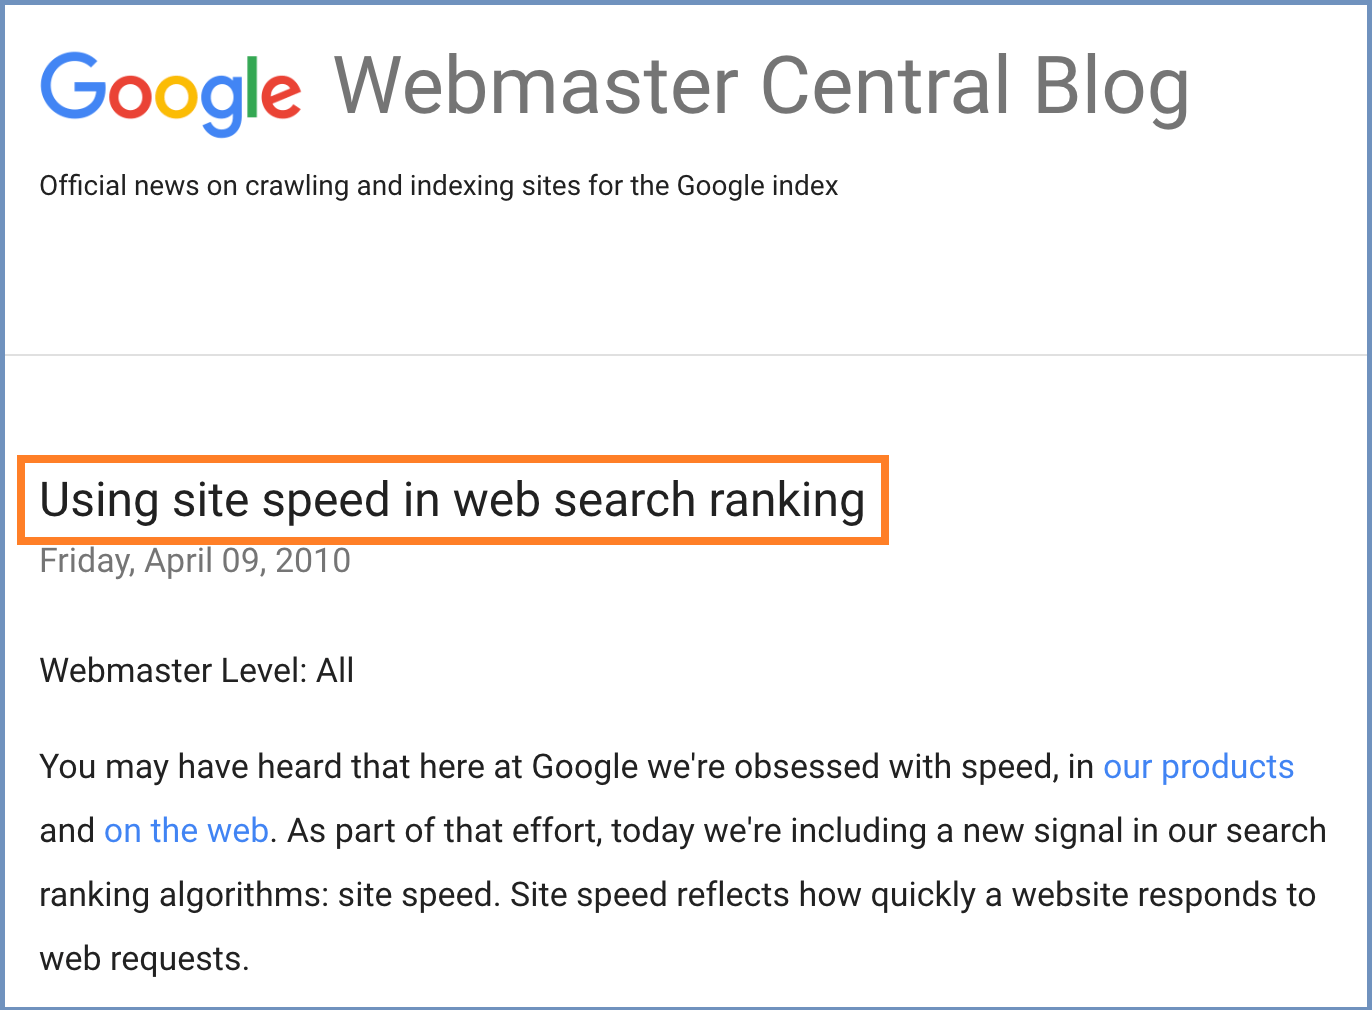 sites-loading-speed-is-ranking-factor